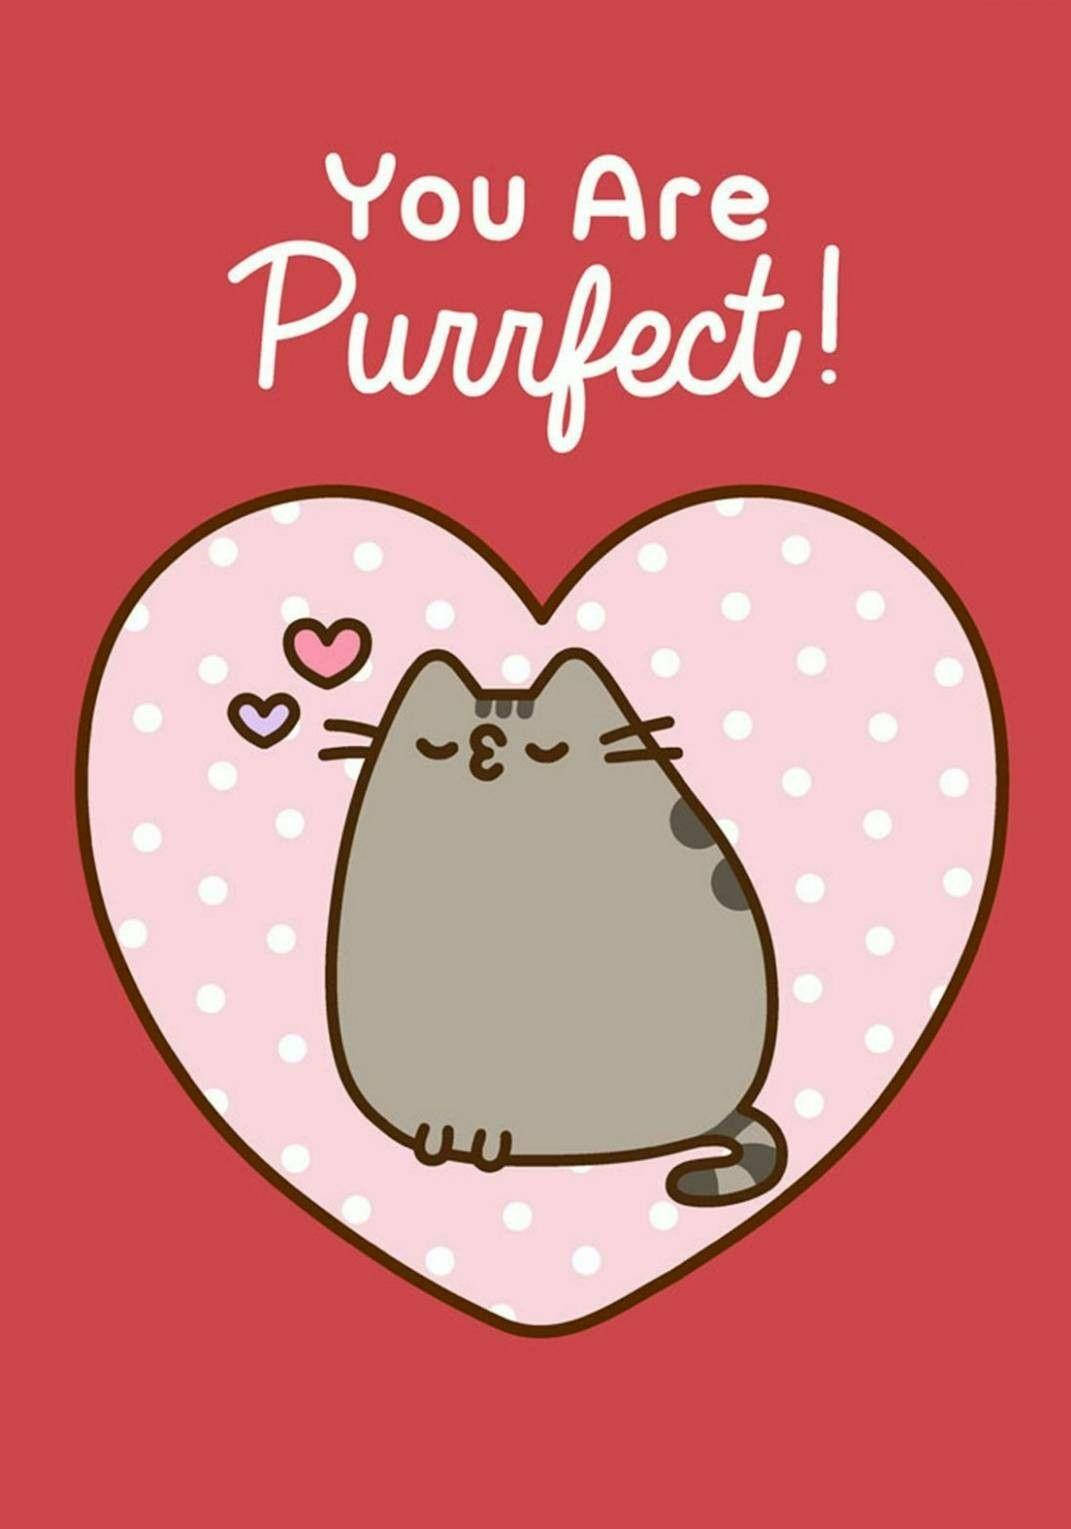 Pusheen 1071X1529 Wallpaper and Background Image